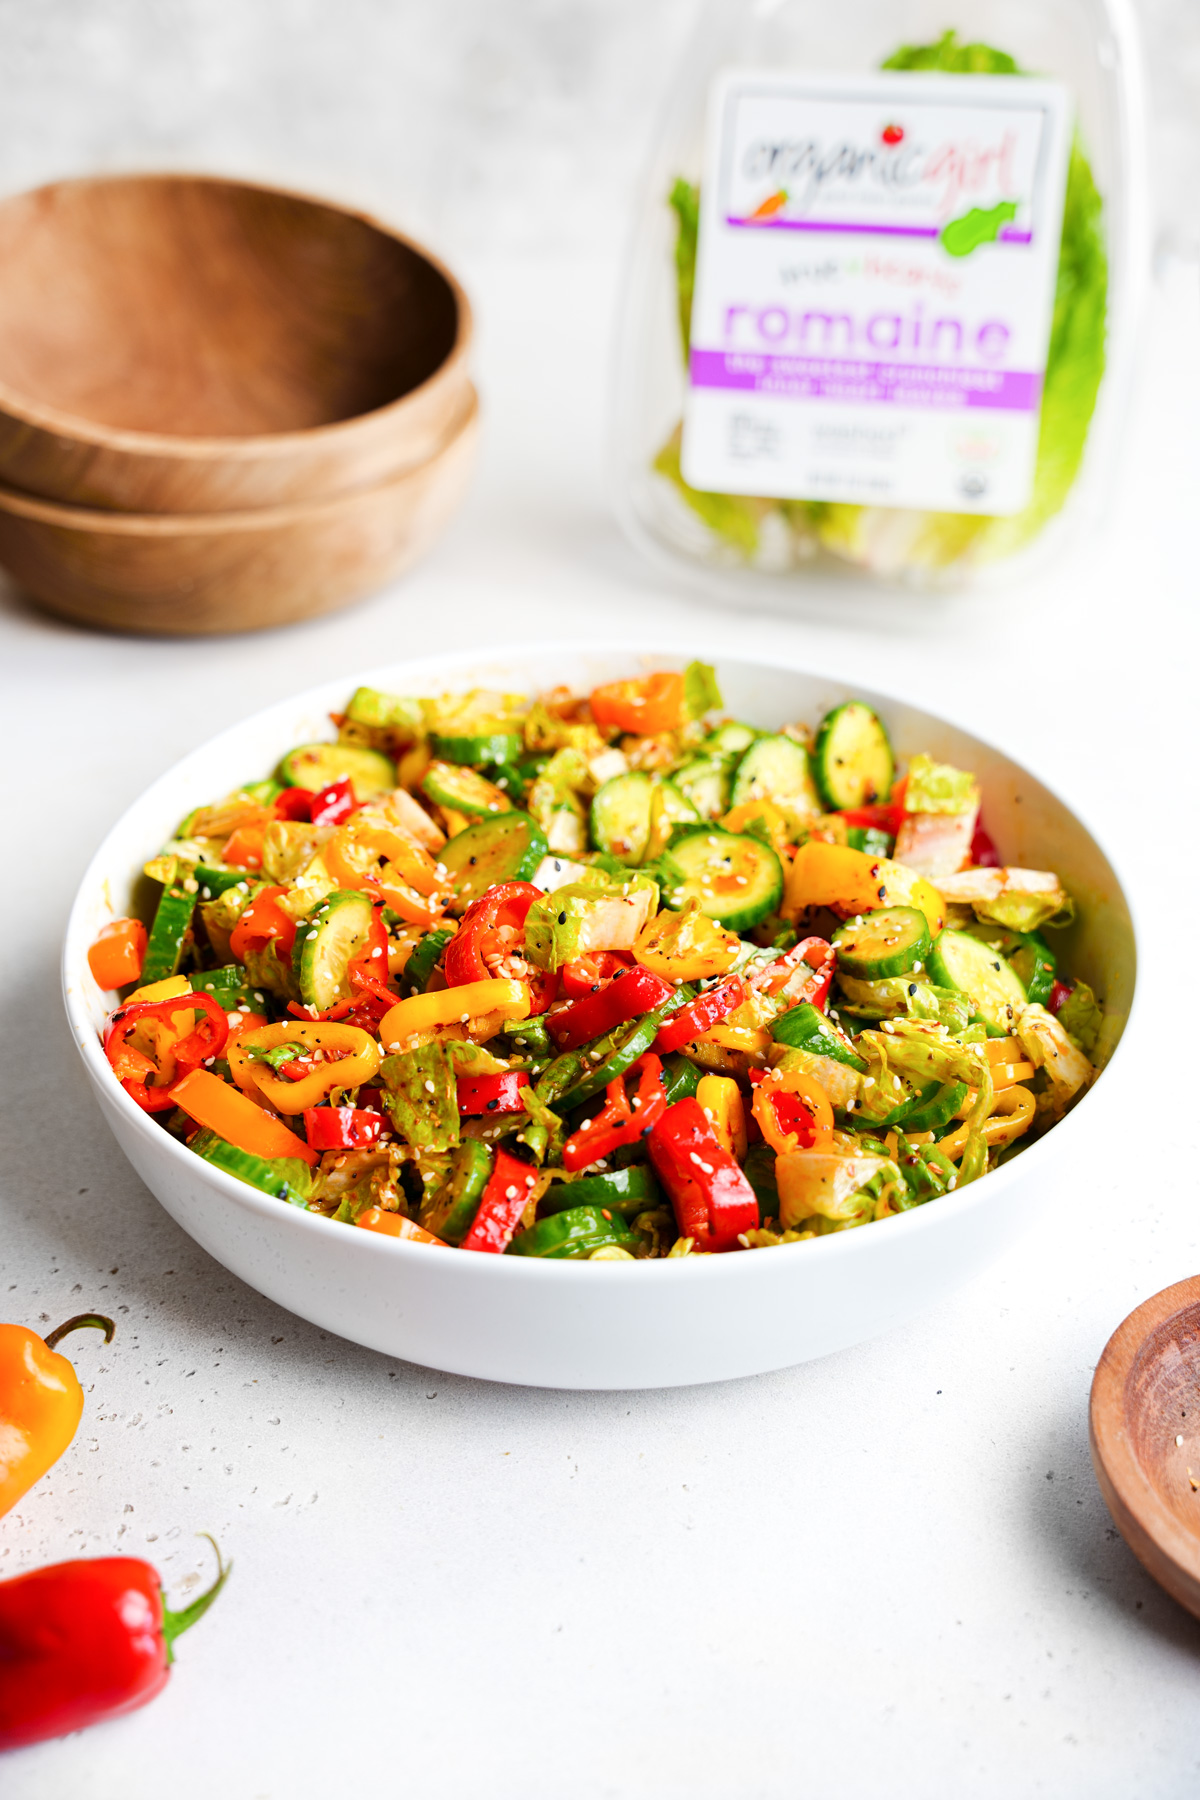 the viral cucumber salad with the organicgirl packaging